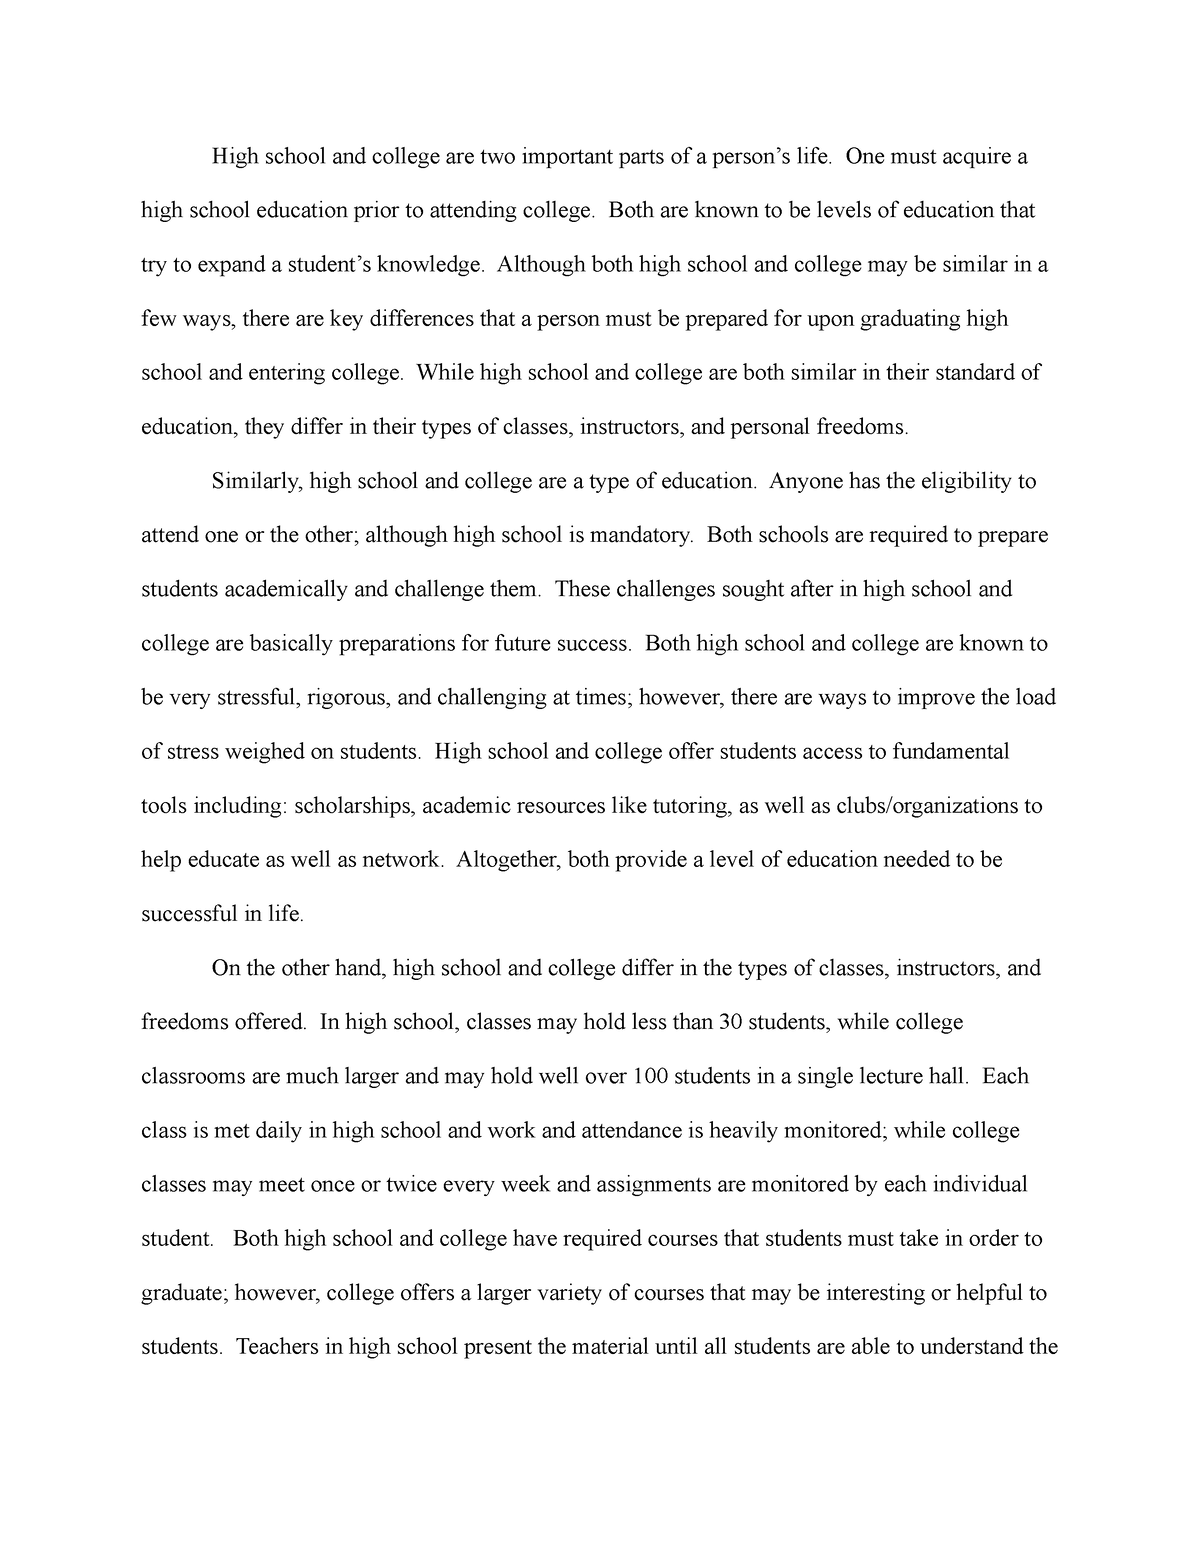 comparison contrast essay about college and high school